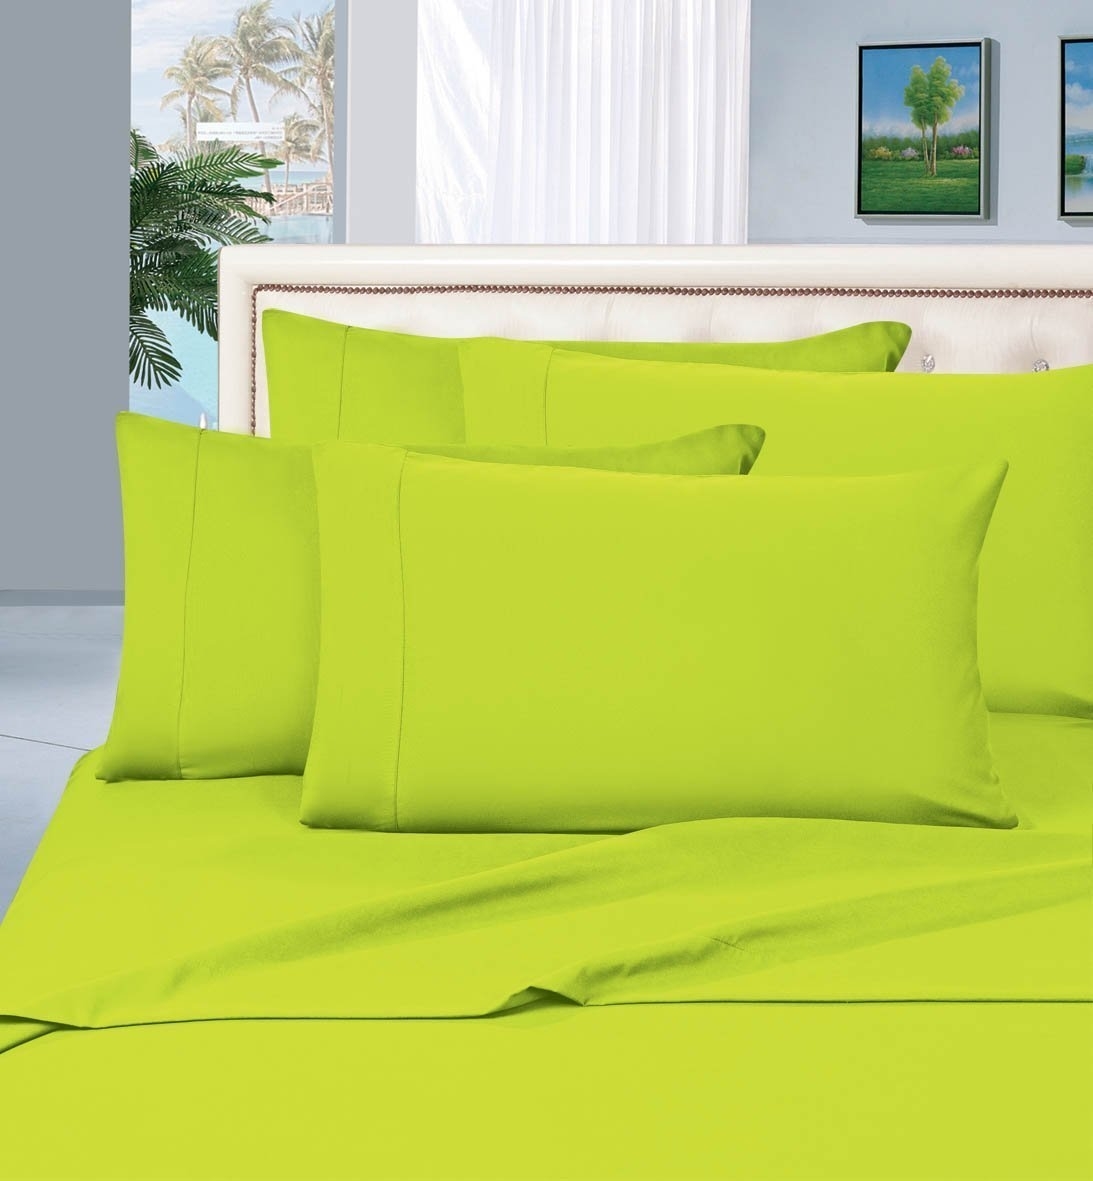 Elegant Comfort 1500 Series Wrinkle Resistant Egyptian Quality Hypoallergenic Ultra Soft Luxury 4-piece Bed Sheet Set, Full, Lime Green